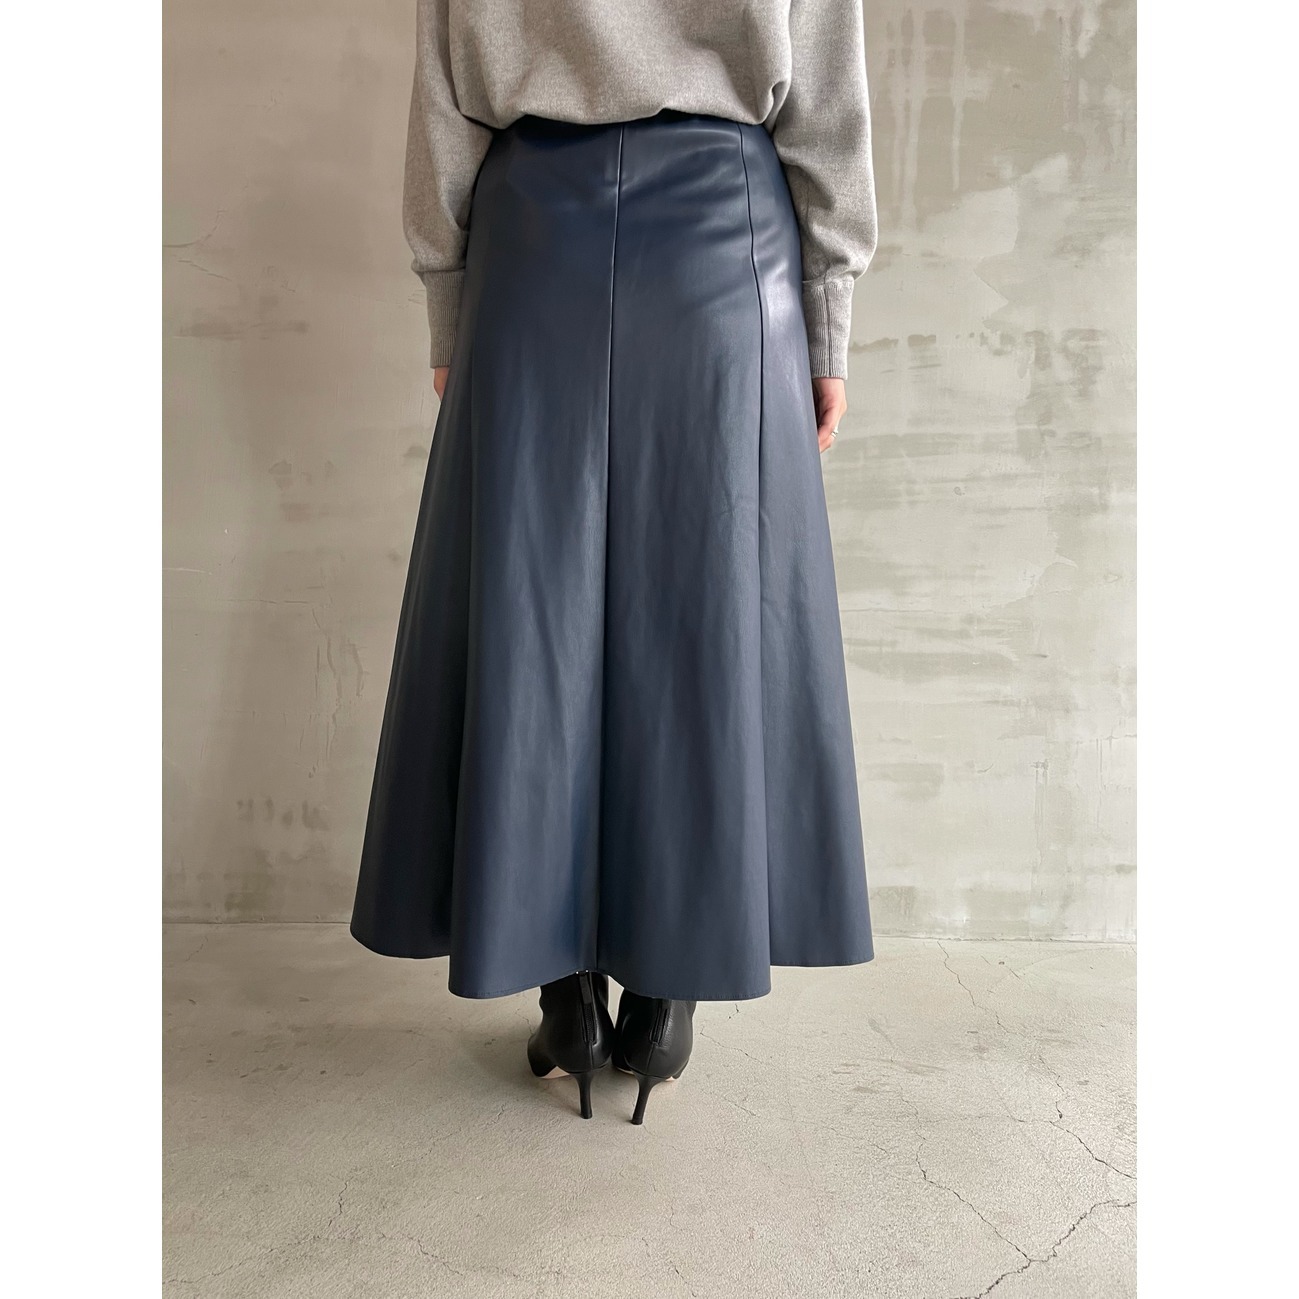 ECO LEATHER FLARE SKIRT 詳細画像 ブルー 9